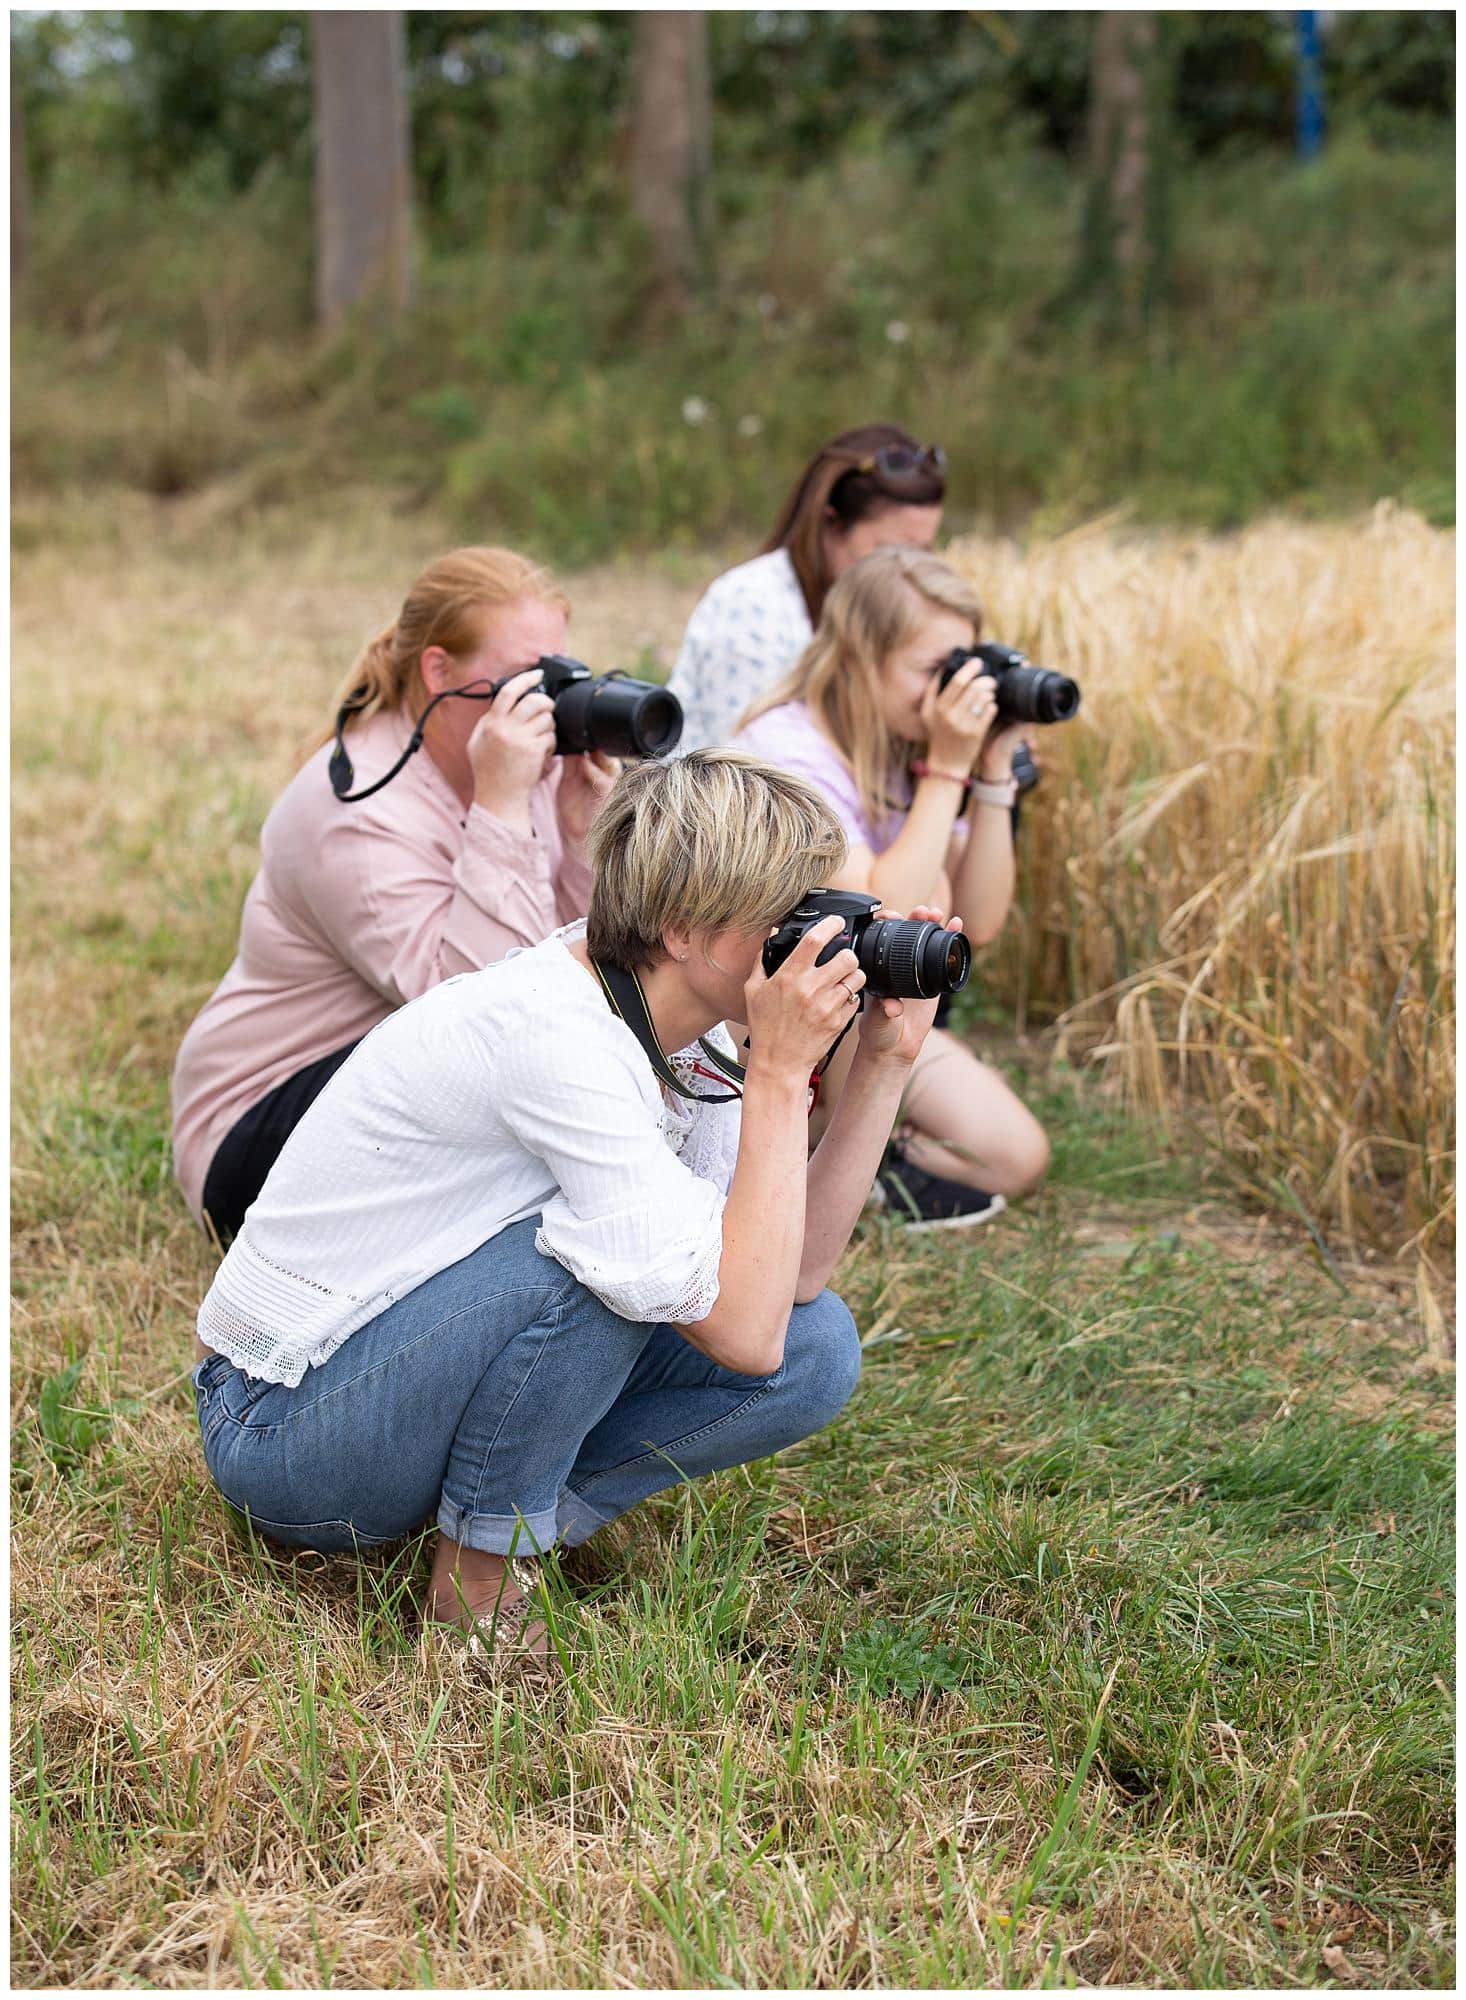 Four Female Photographers take photos with their camera's during a Beginners Photography Workshop in Stoke By Clare, Suffolk